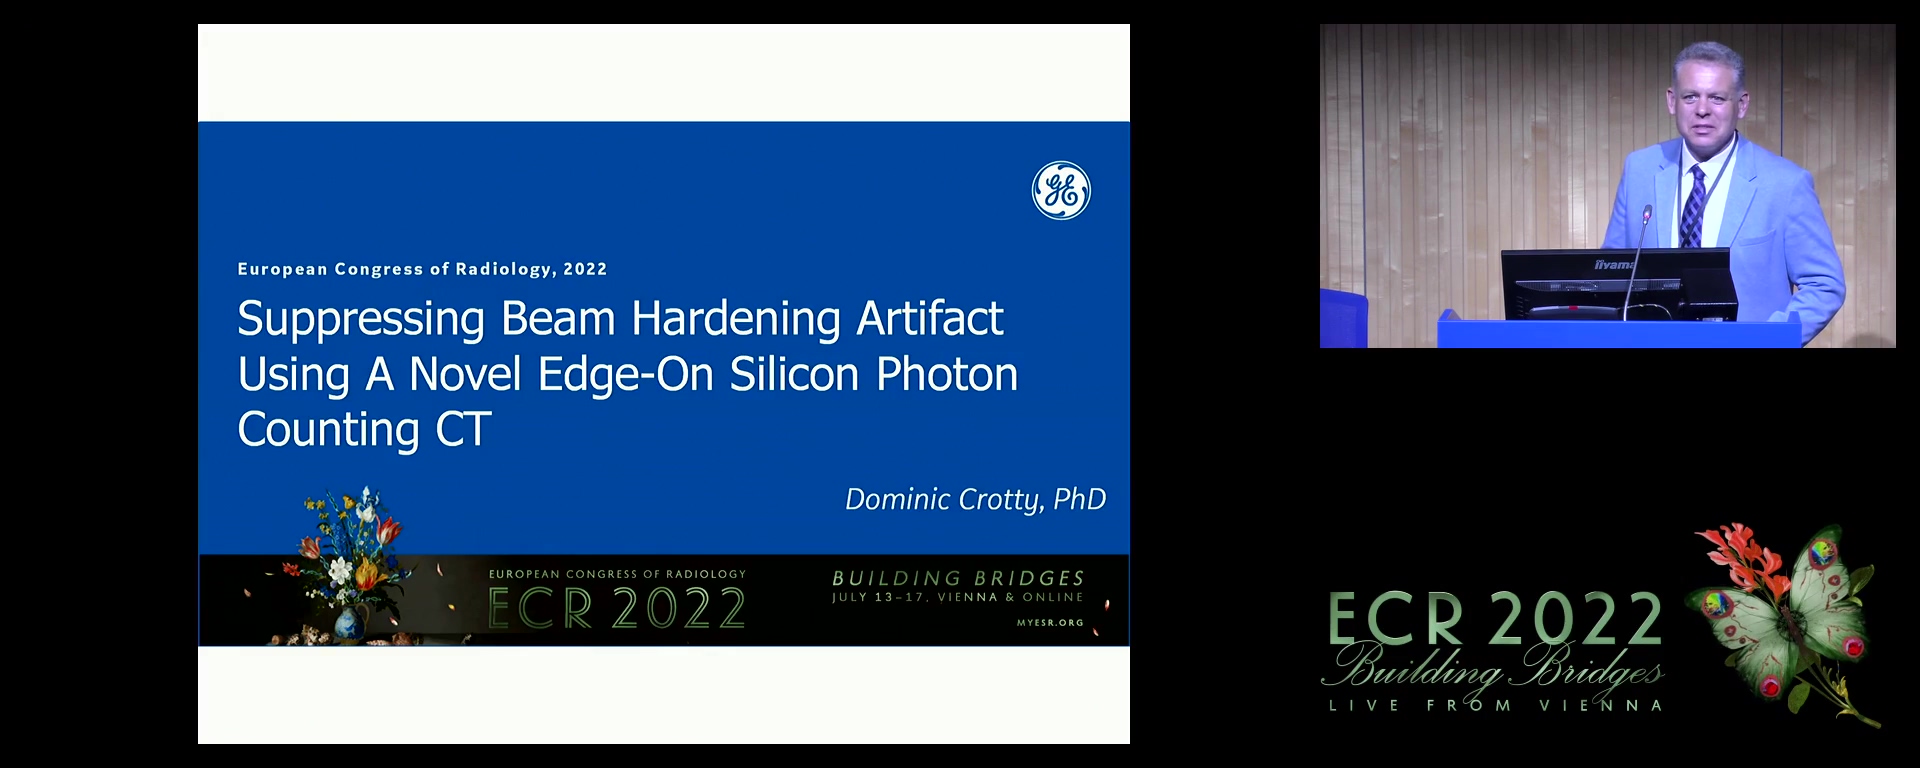 Suppressing beam-hardening artefact using a novel edge-on silicon photon-counting CT - Dominic Crotty, Cork / IE